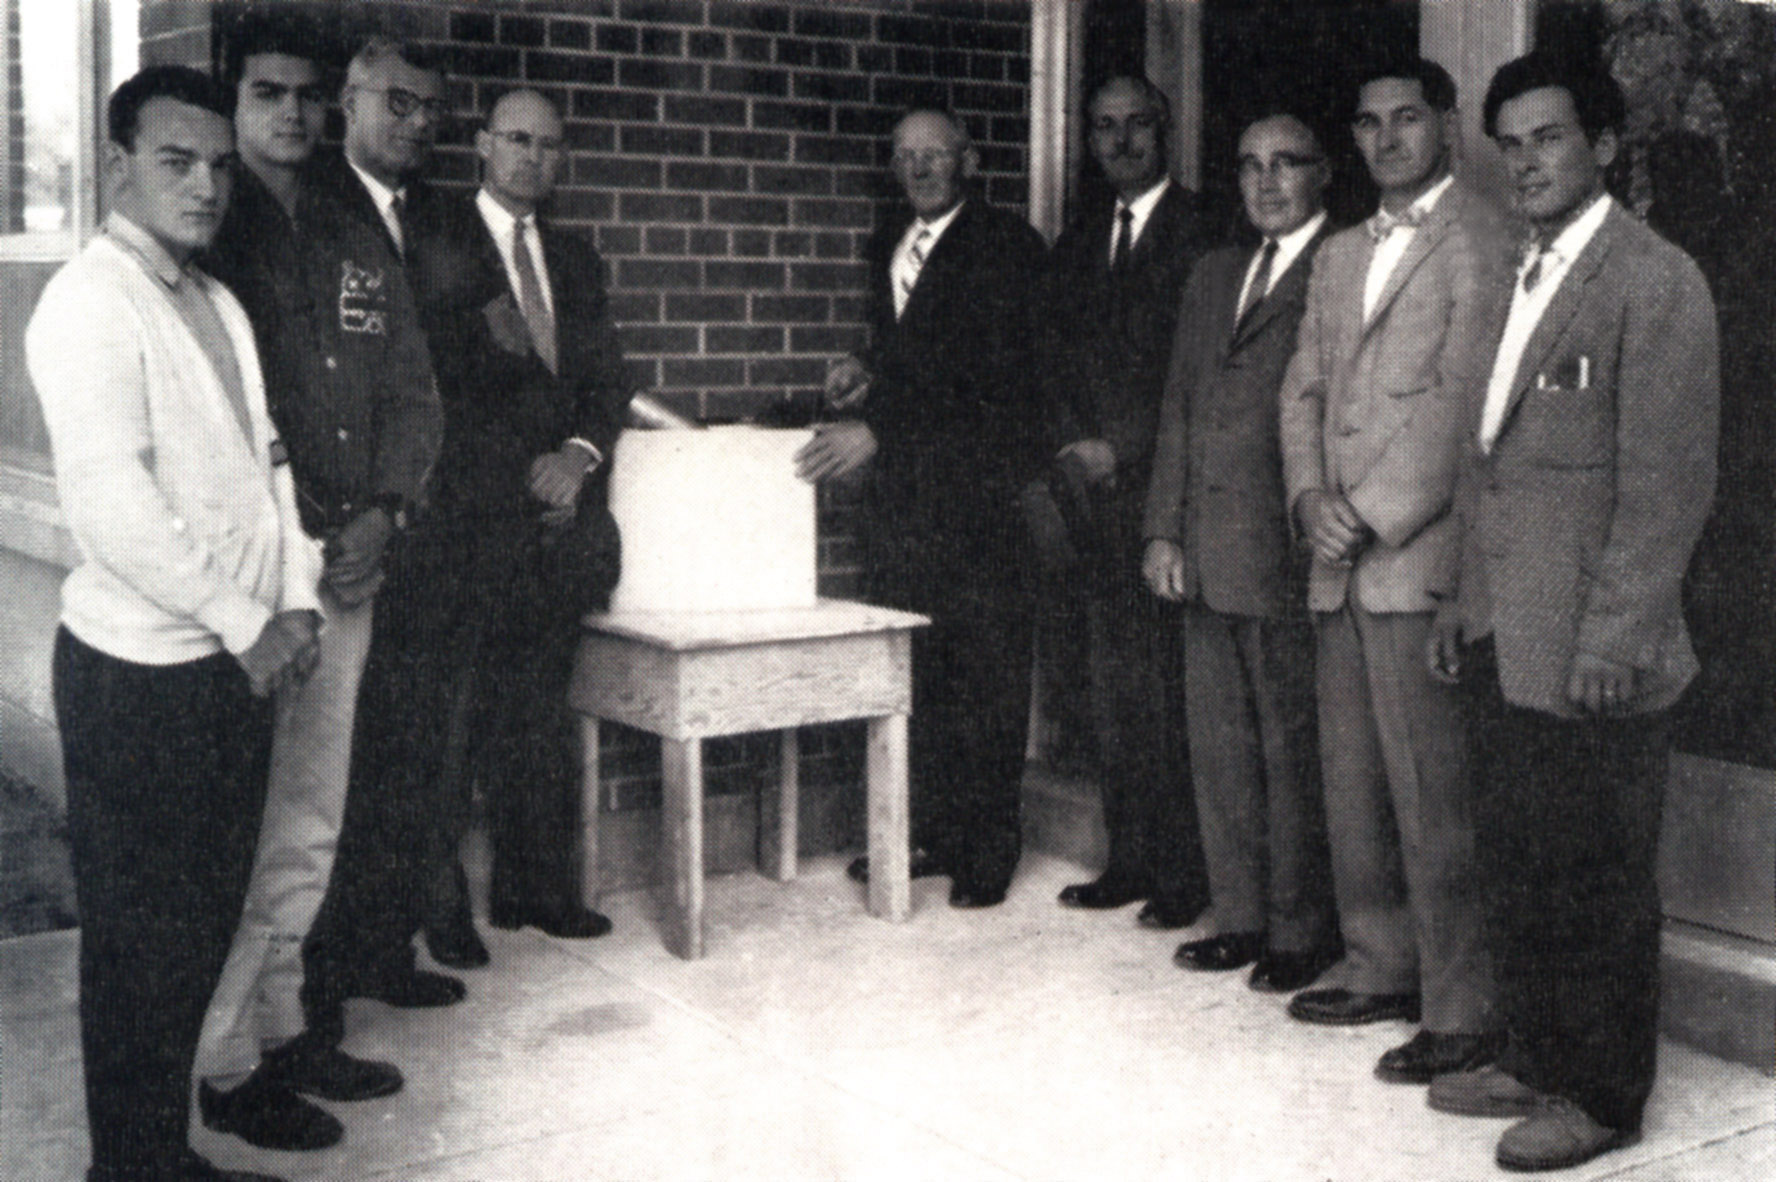 (Click to magnify) Bruce Brandon, left; Peter Bernhardt 3rd from right.